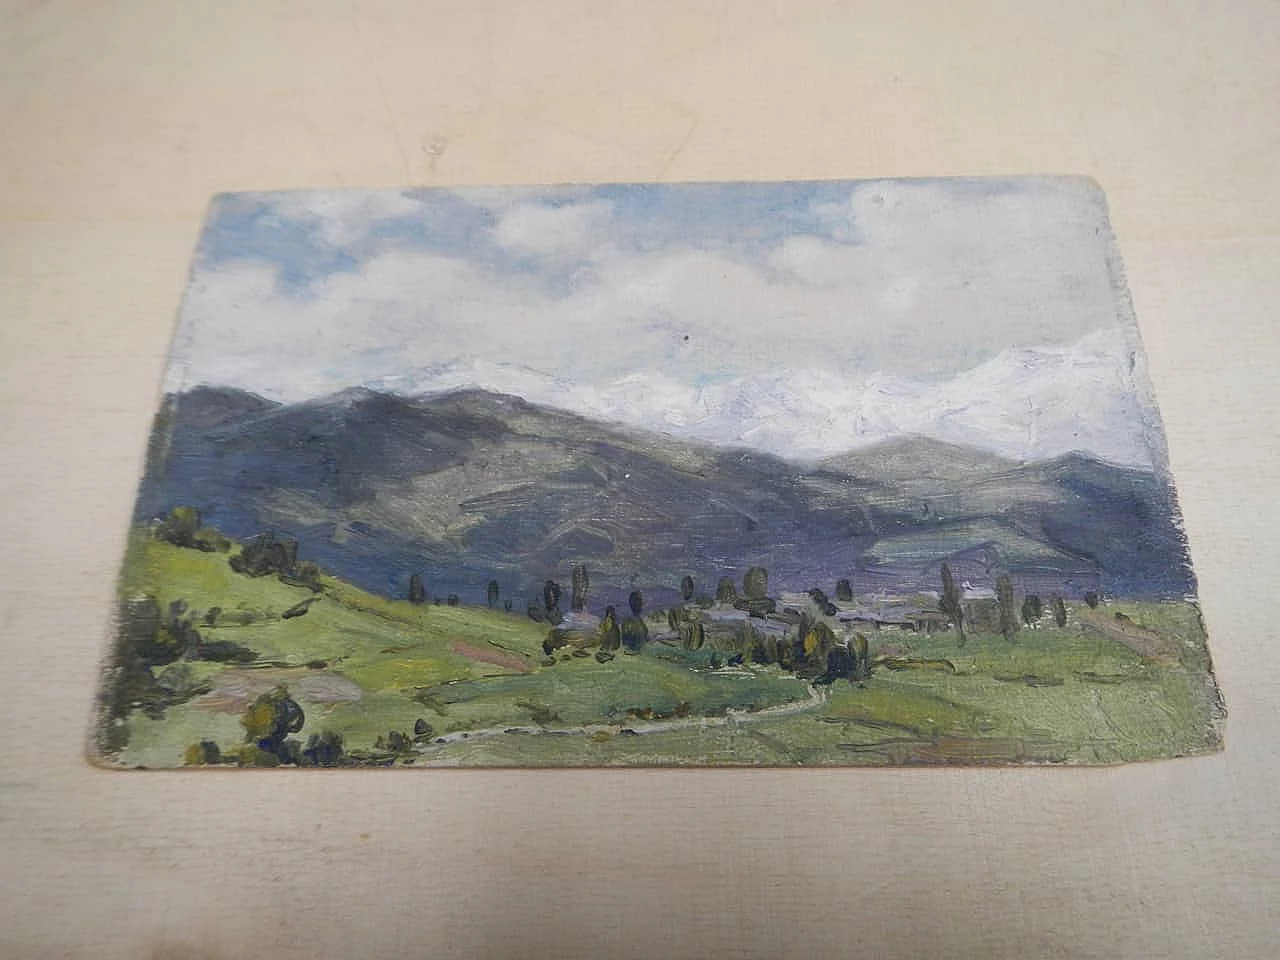 Des Champs, Pyrenees, painting on wood, early 20th century 9